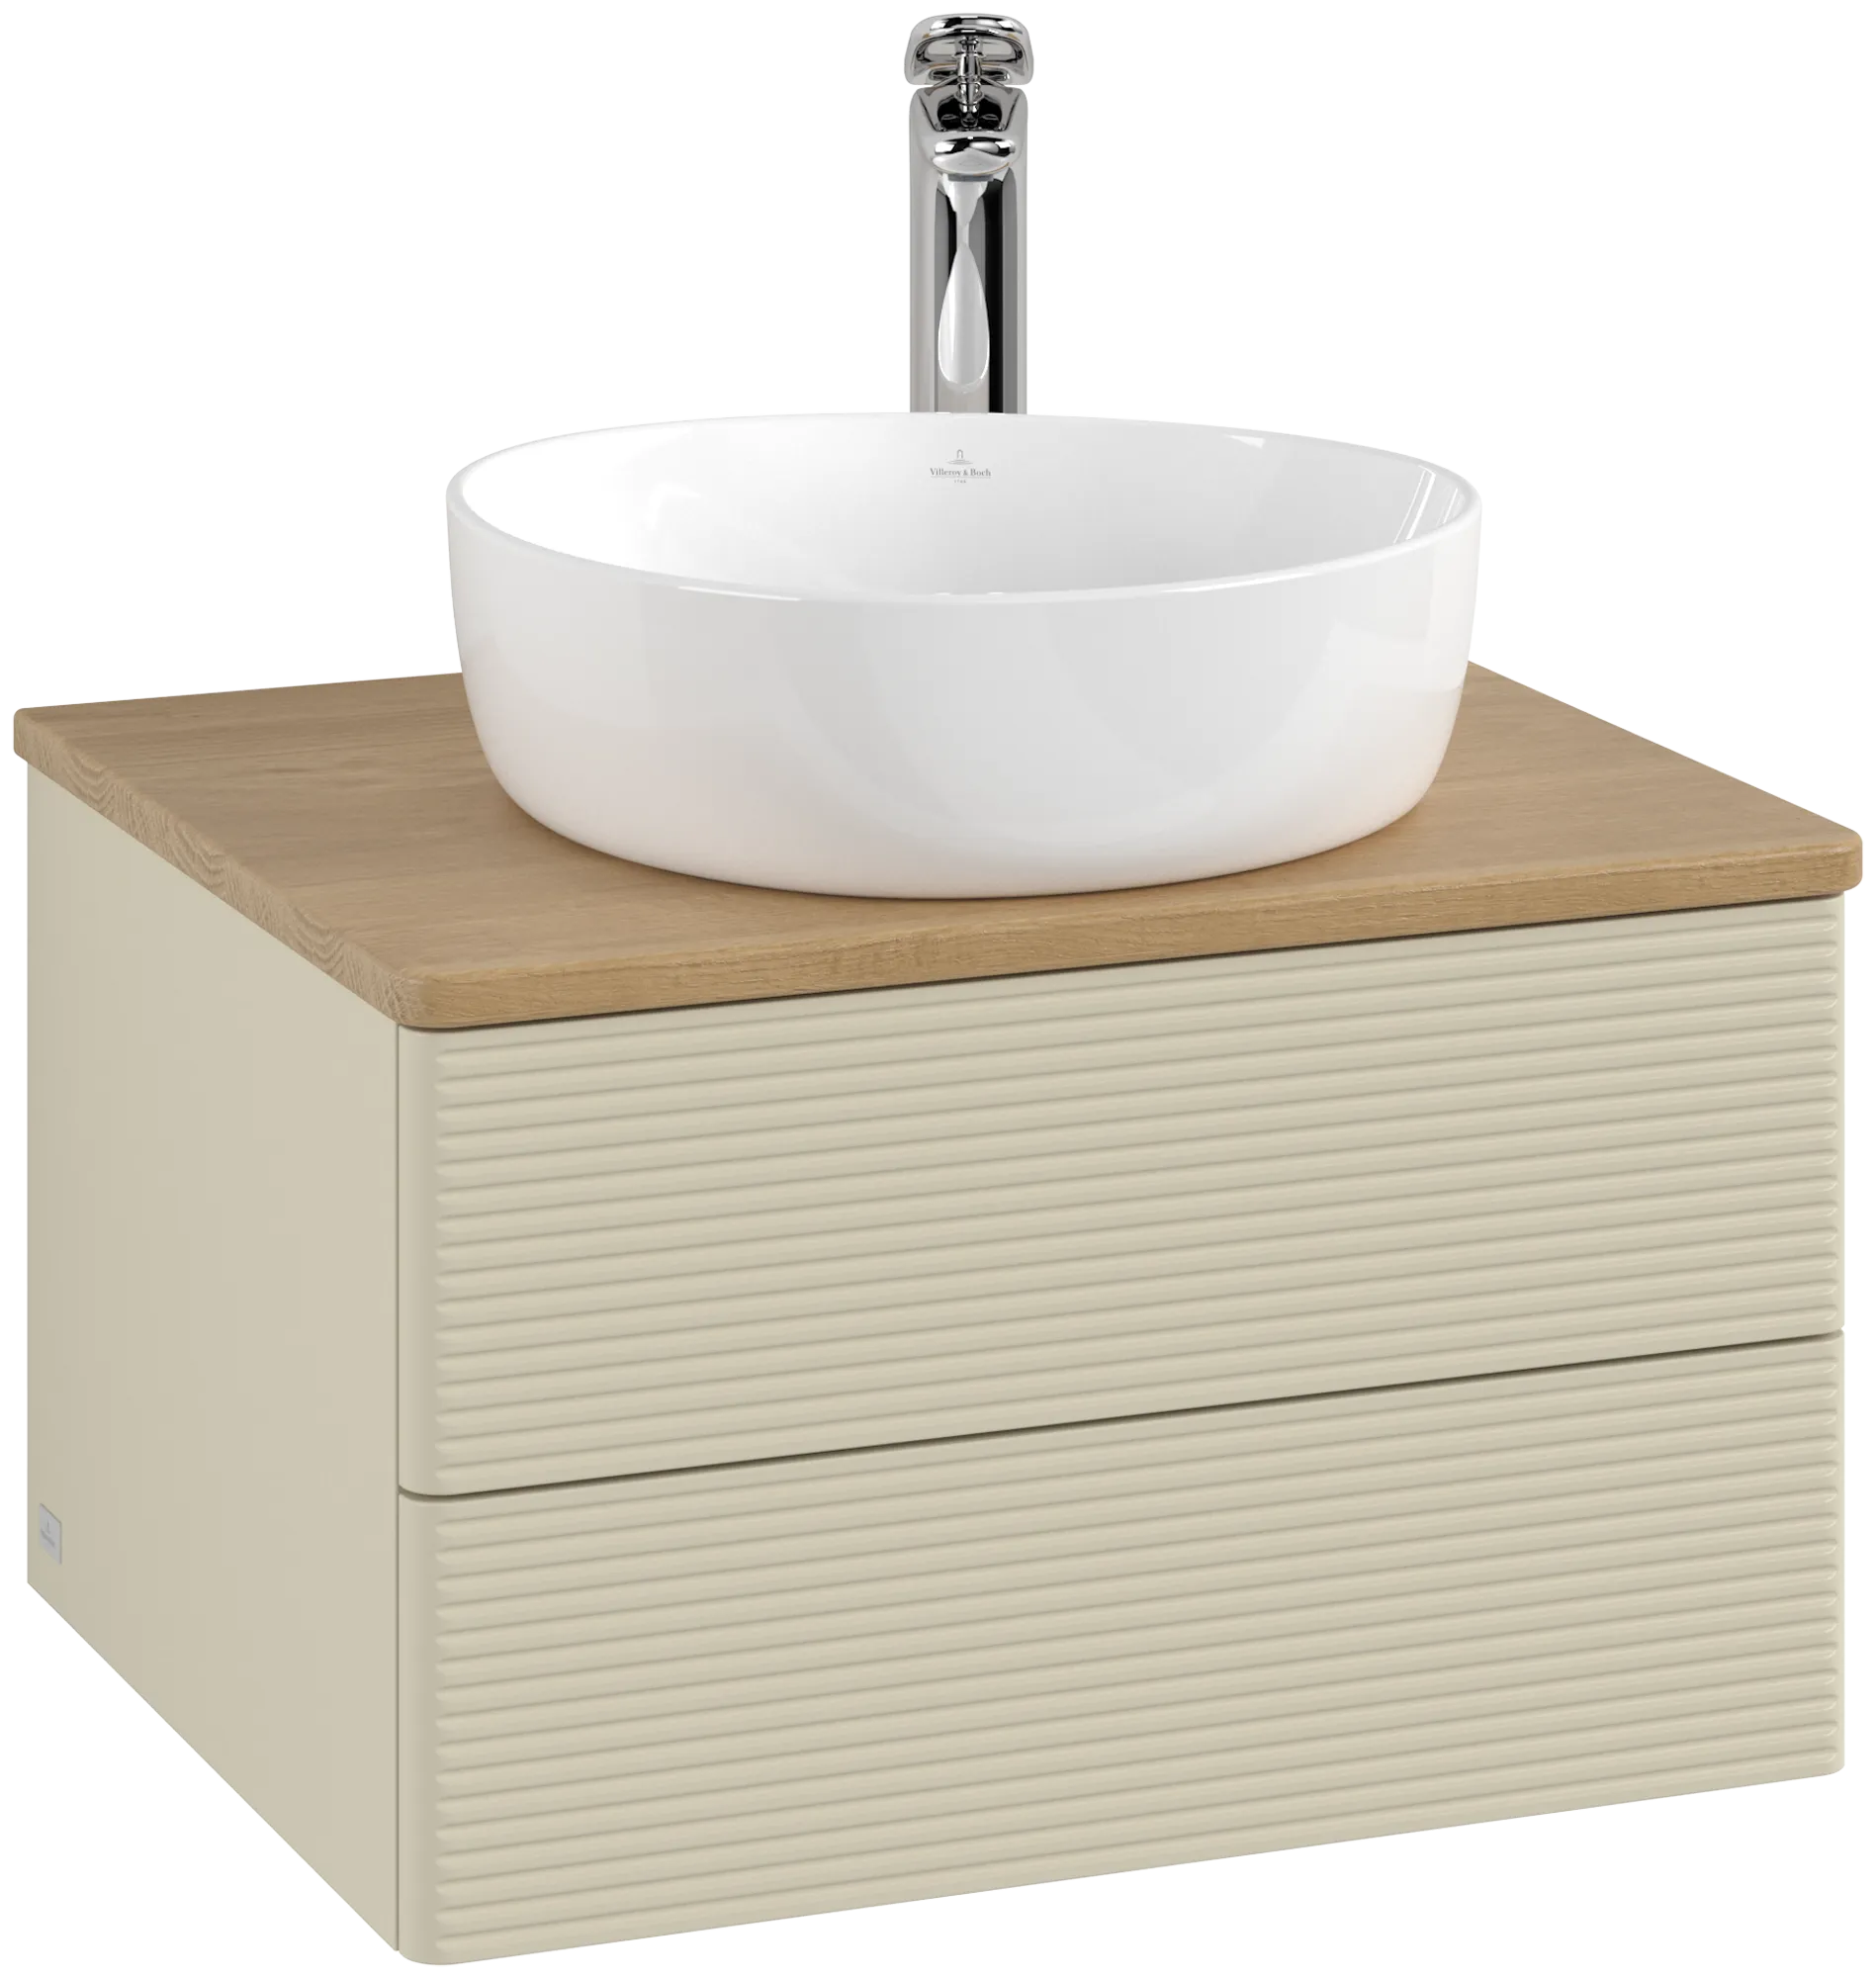 Picture of VILLEROY BOCH Antao Vanity unit, with lighting, 2 pull-out compartments, 600 x 360 x 500 mm, Front with grain texture, Silk Grey Matt Lacquer / Honey Oak #L18151HJ